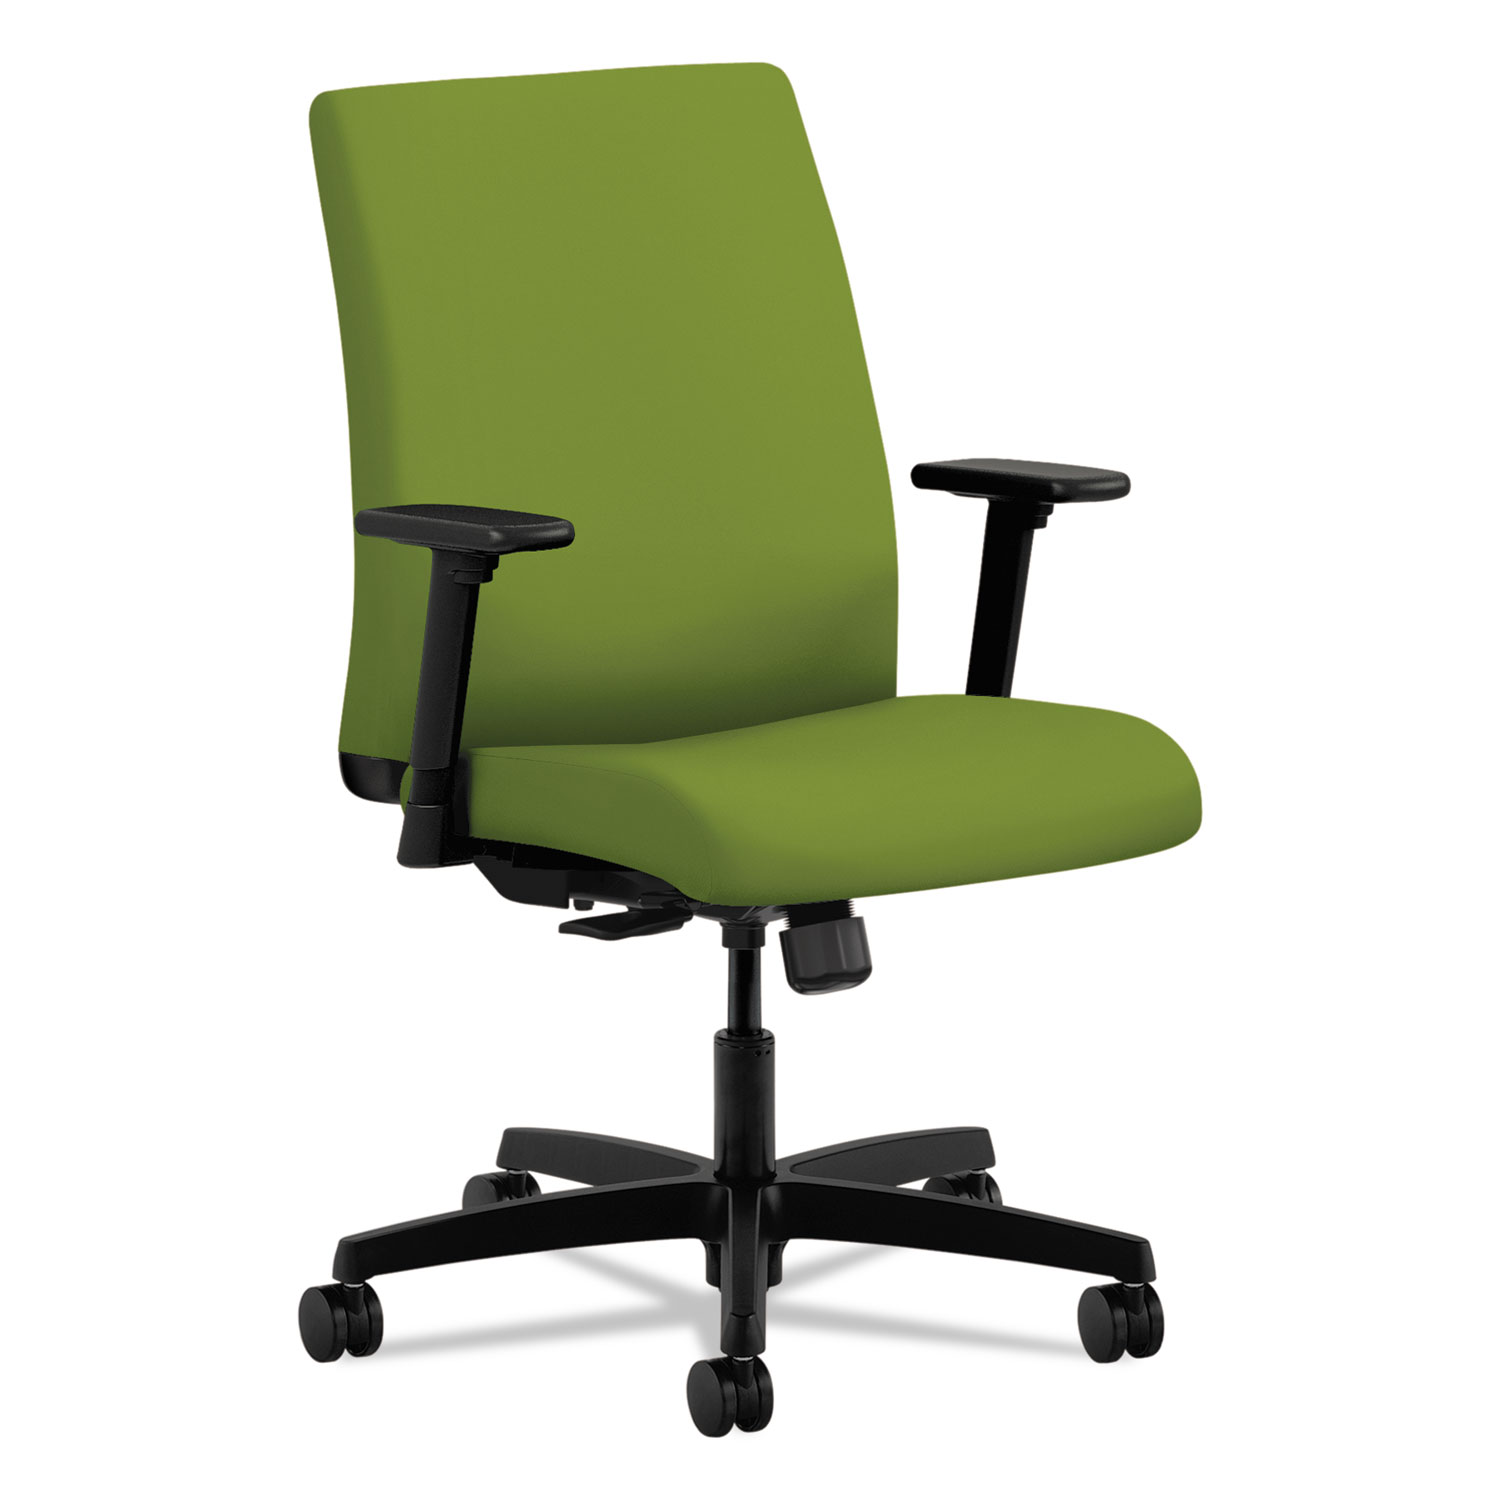  HON HITL1.A.H.U.CU84.T.SB Ignition Series Fabric Low-Back Task Chair, Supports up to 300 lbs., Pear Seat/Pear Back, Black Base (HONIT105CU84) 